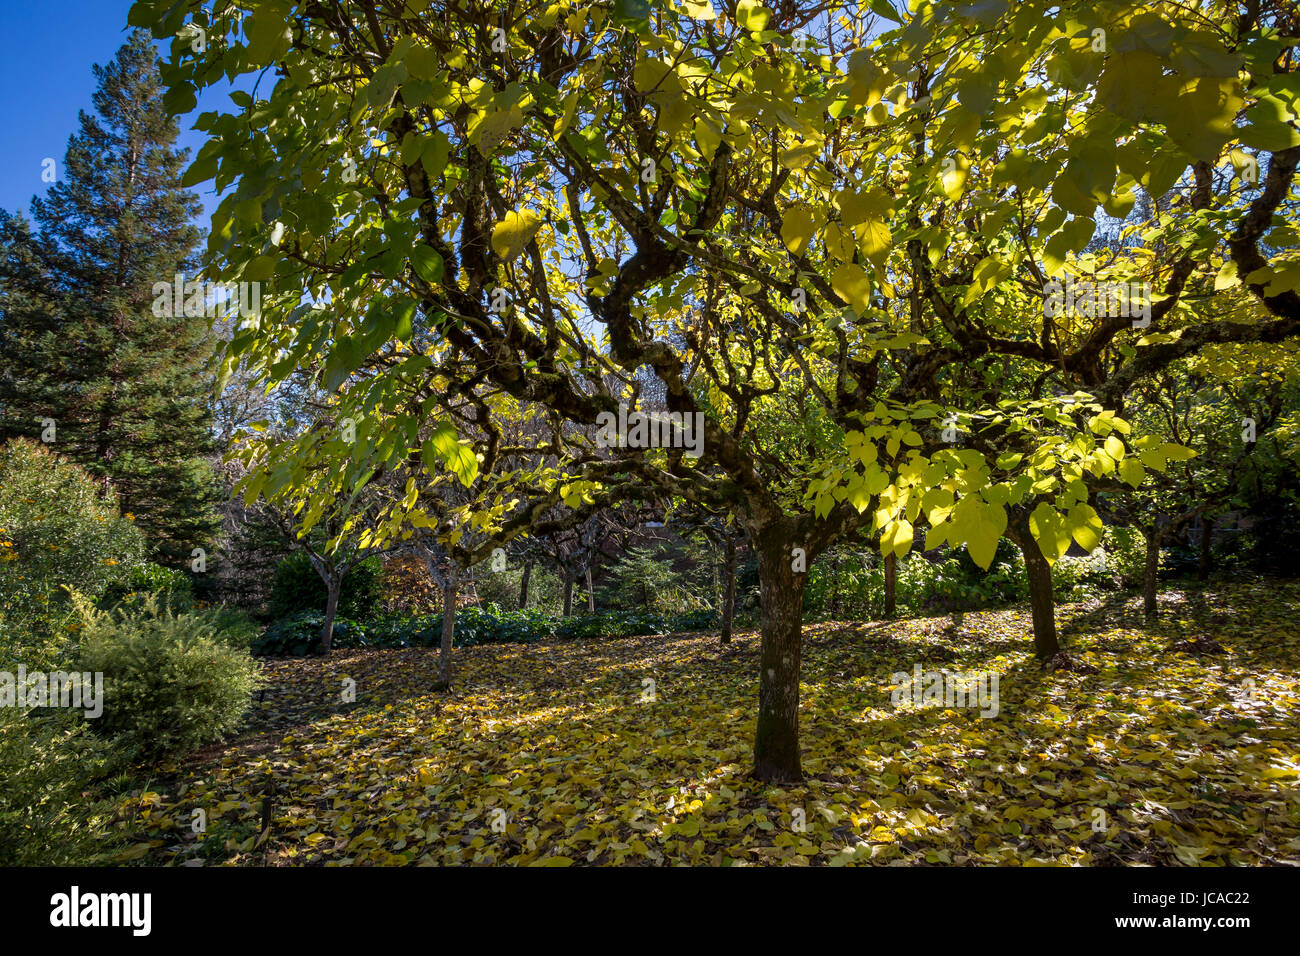 autumn leaves, Mulberry trees, autumn color, Schramsberg Vineyards, Calistoga, Napa Valley, California, United States, North America Stock Photo